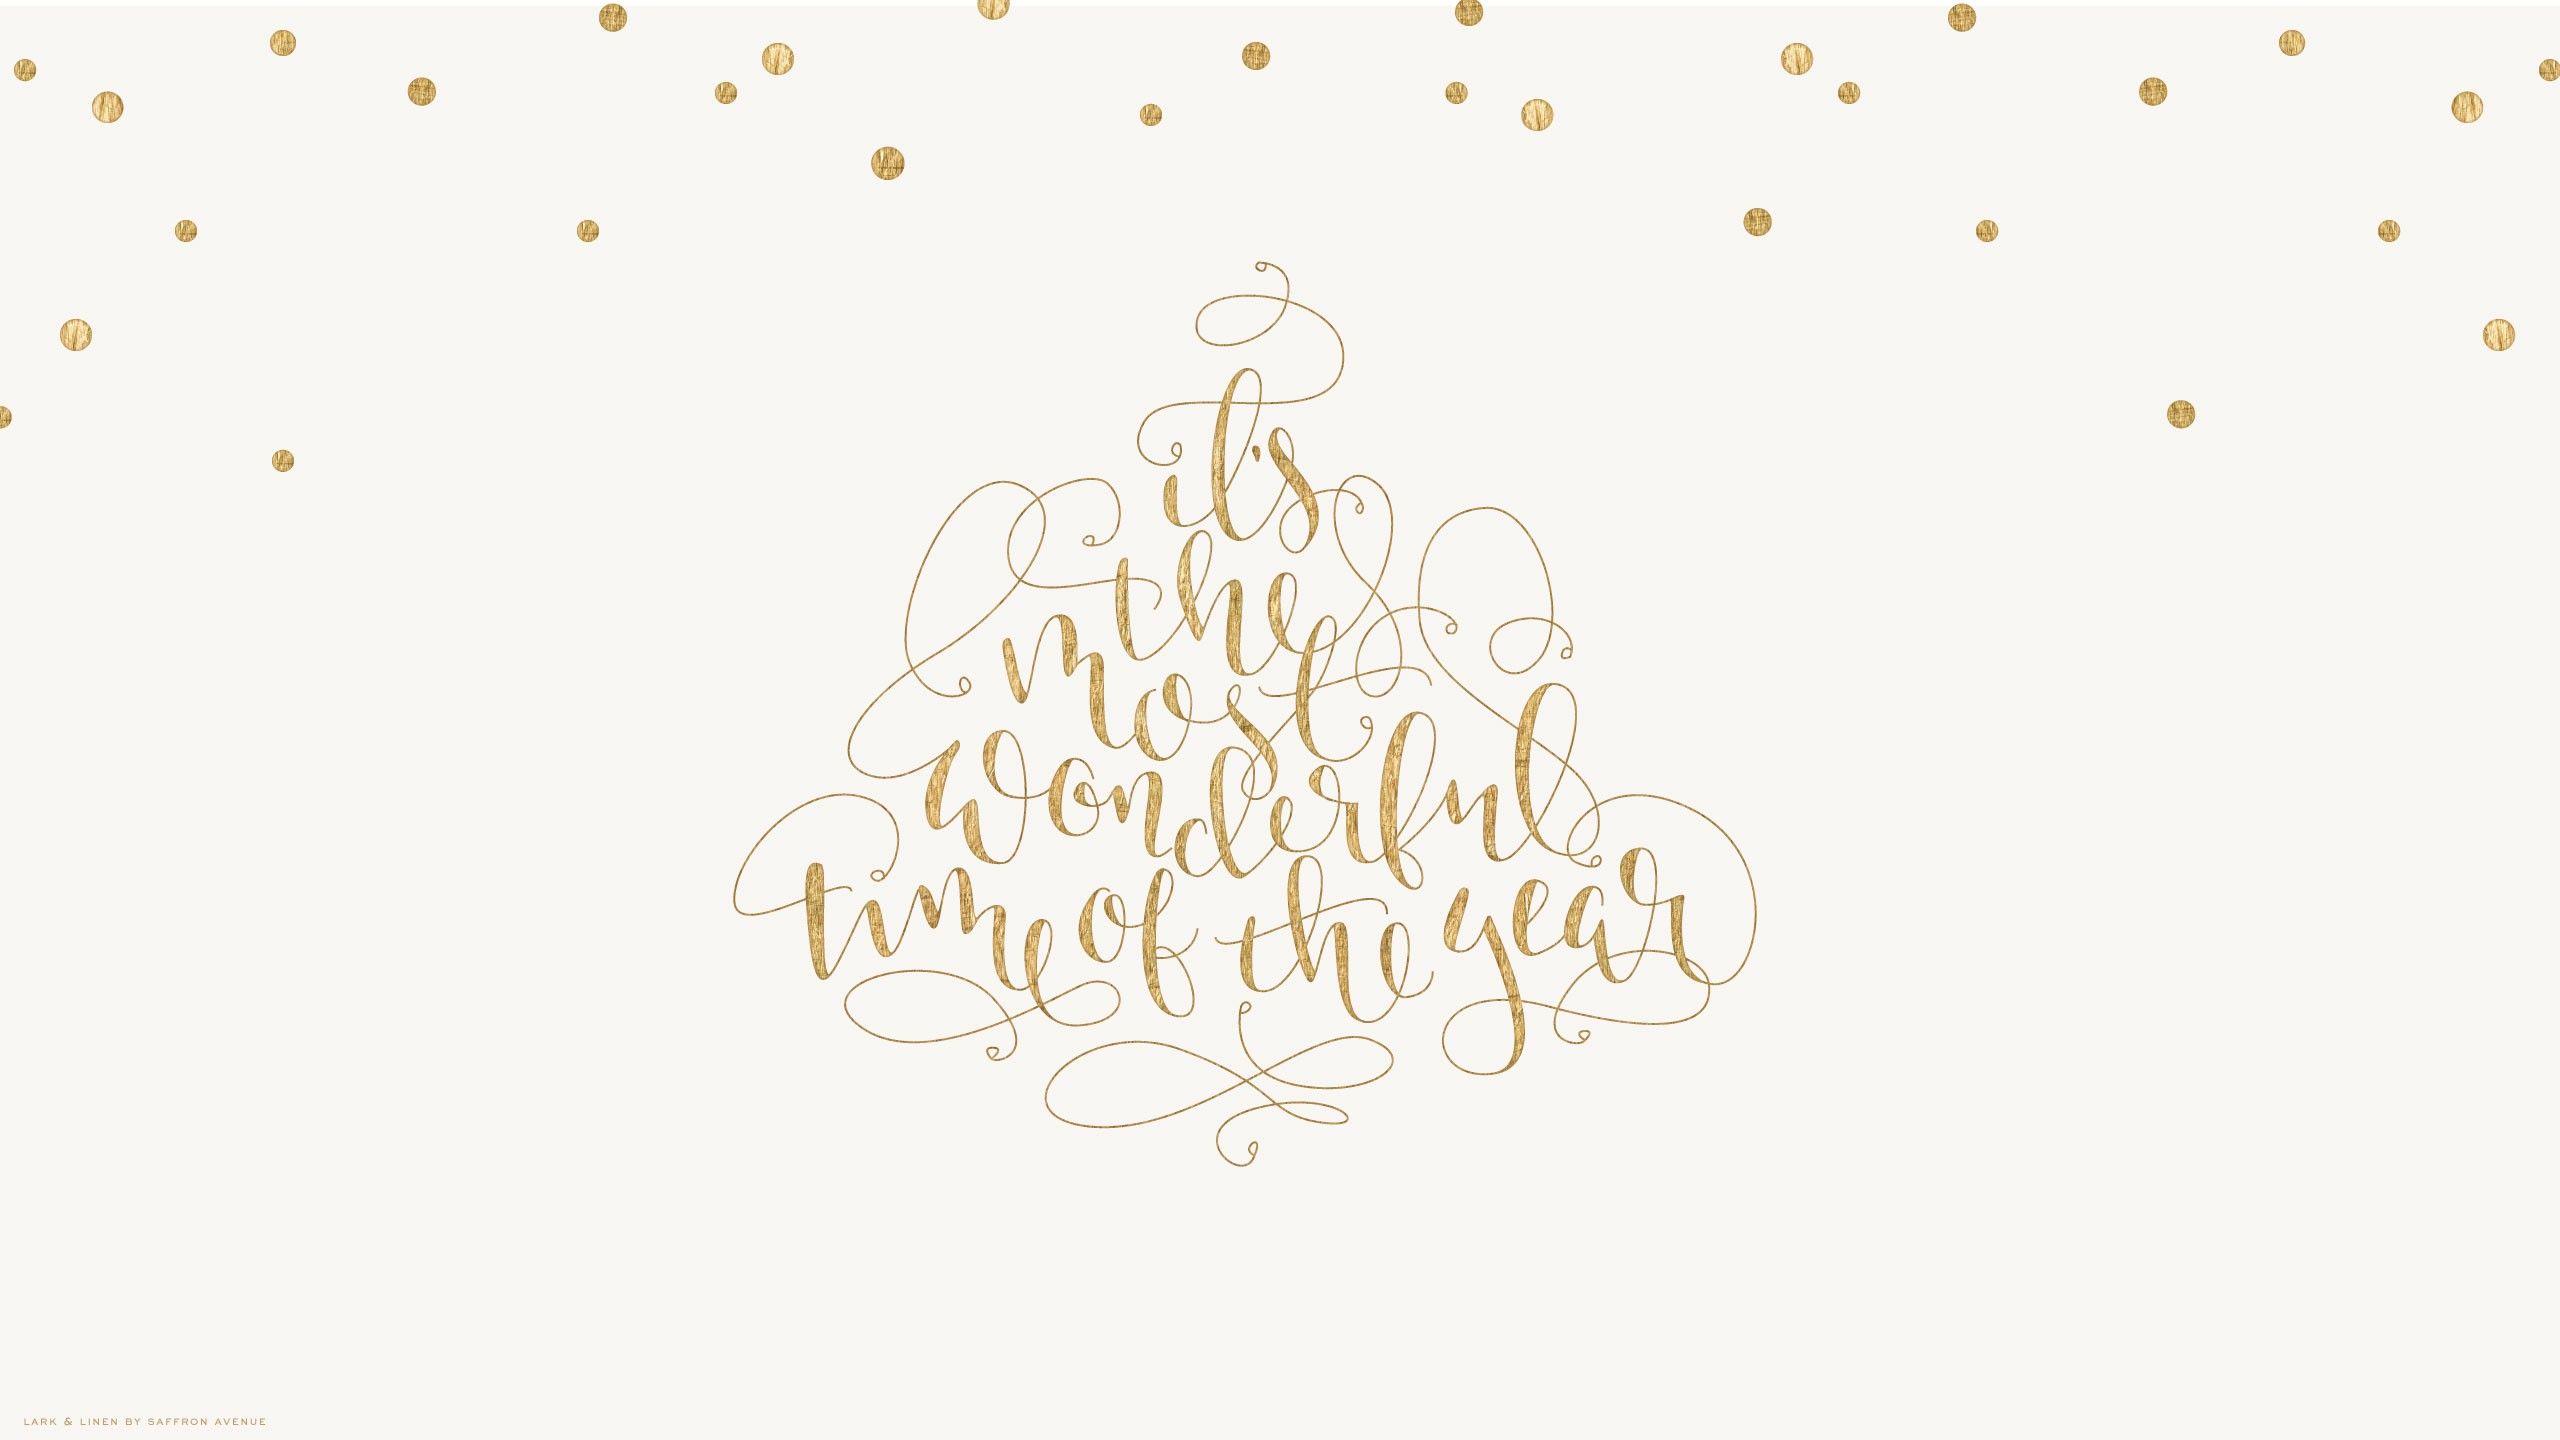 White And Gold Christmas Wallpaper